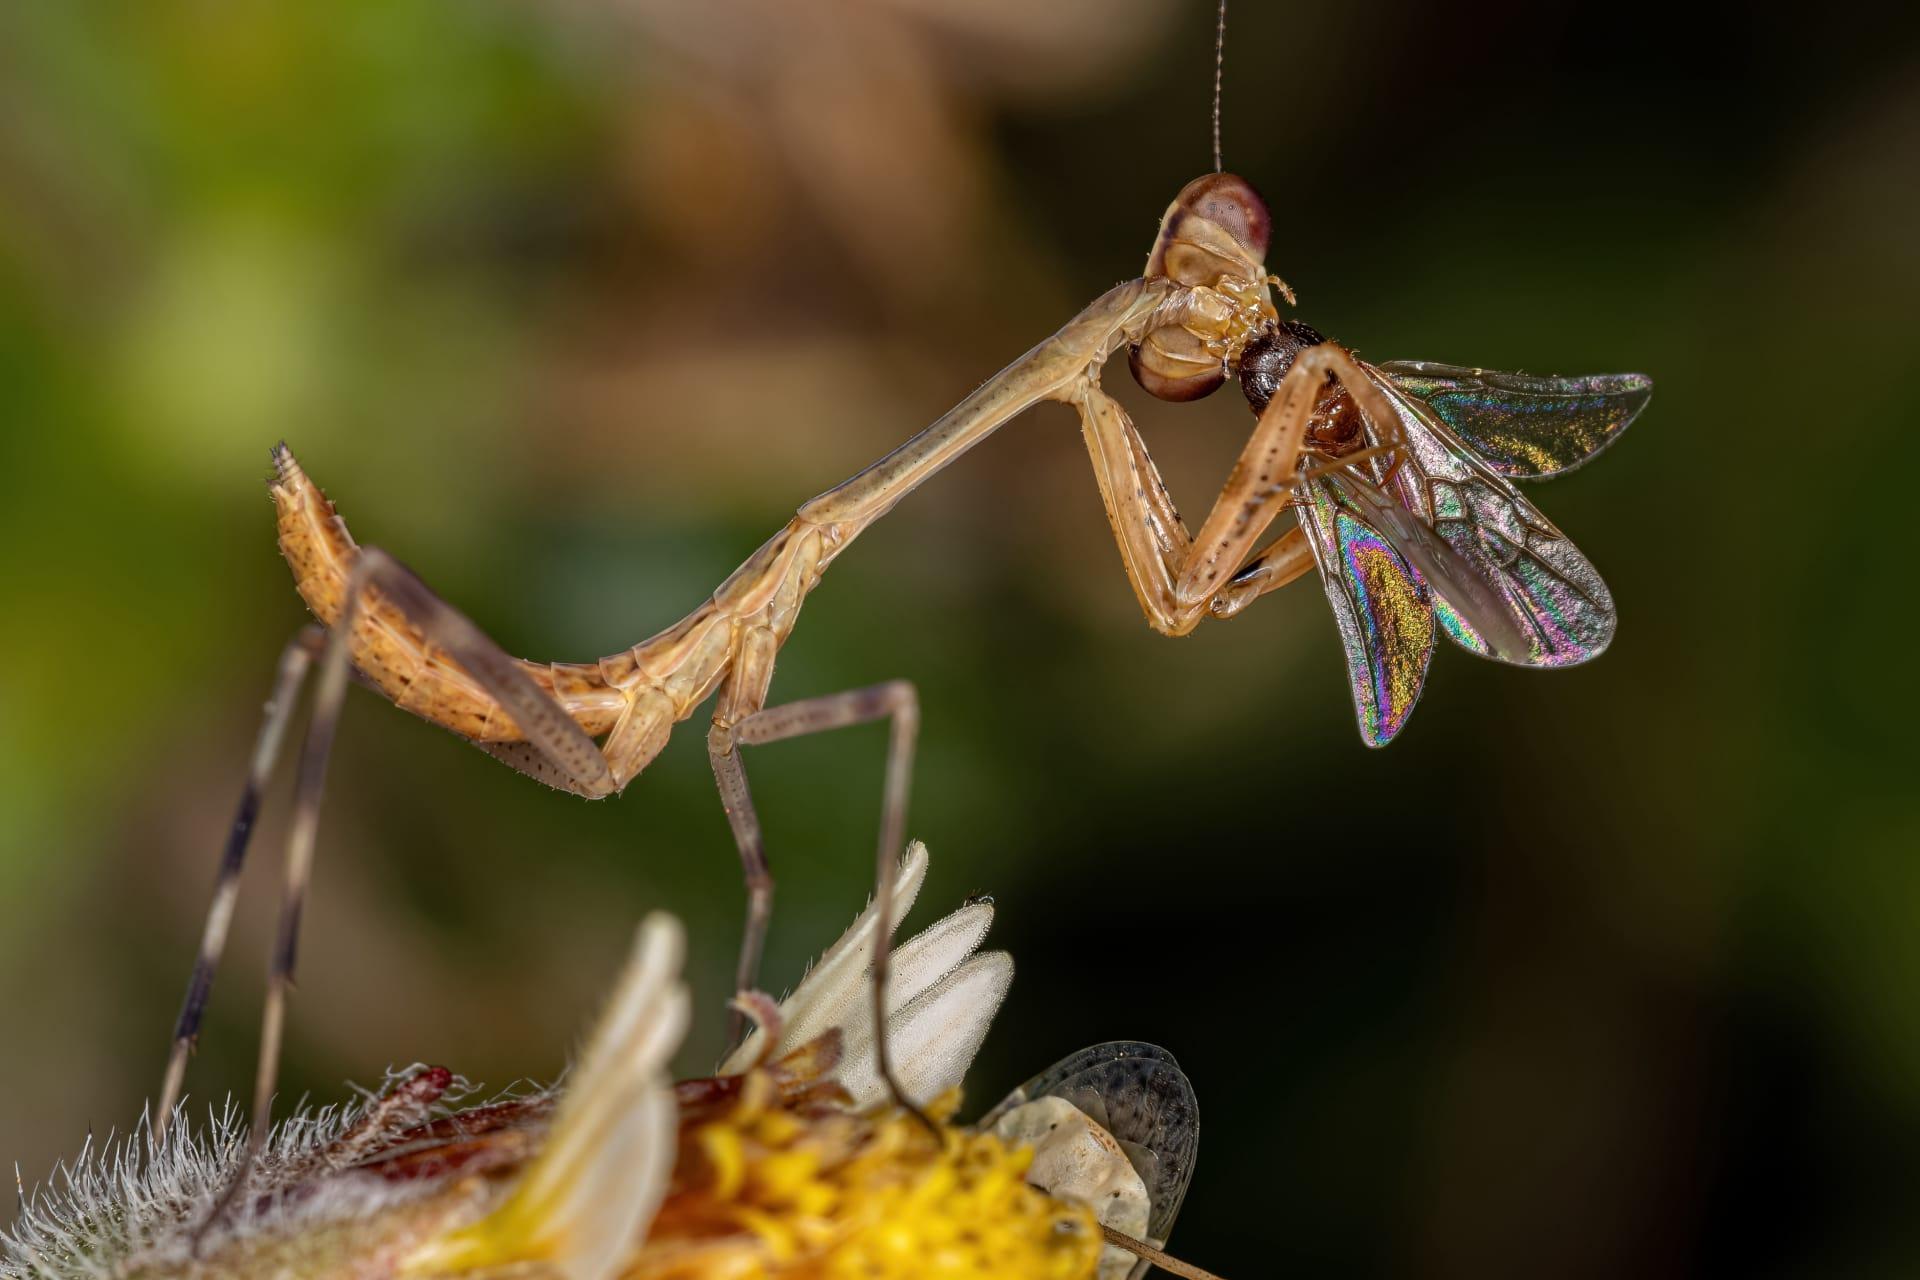 Mantid pictures